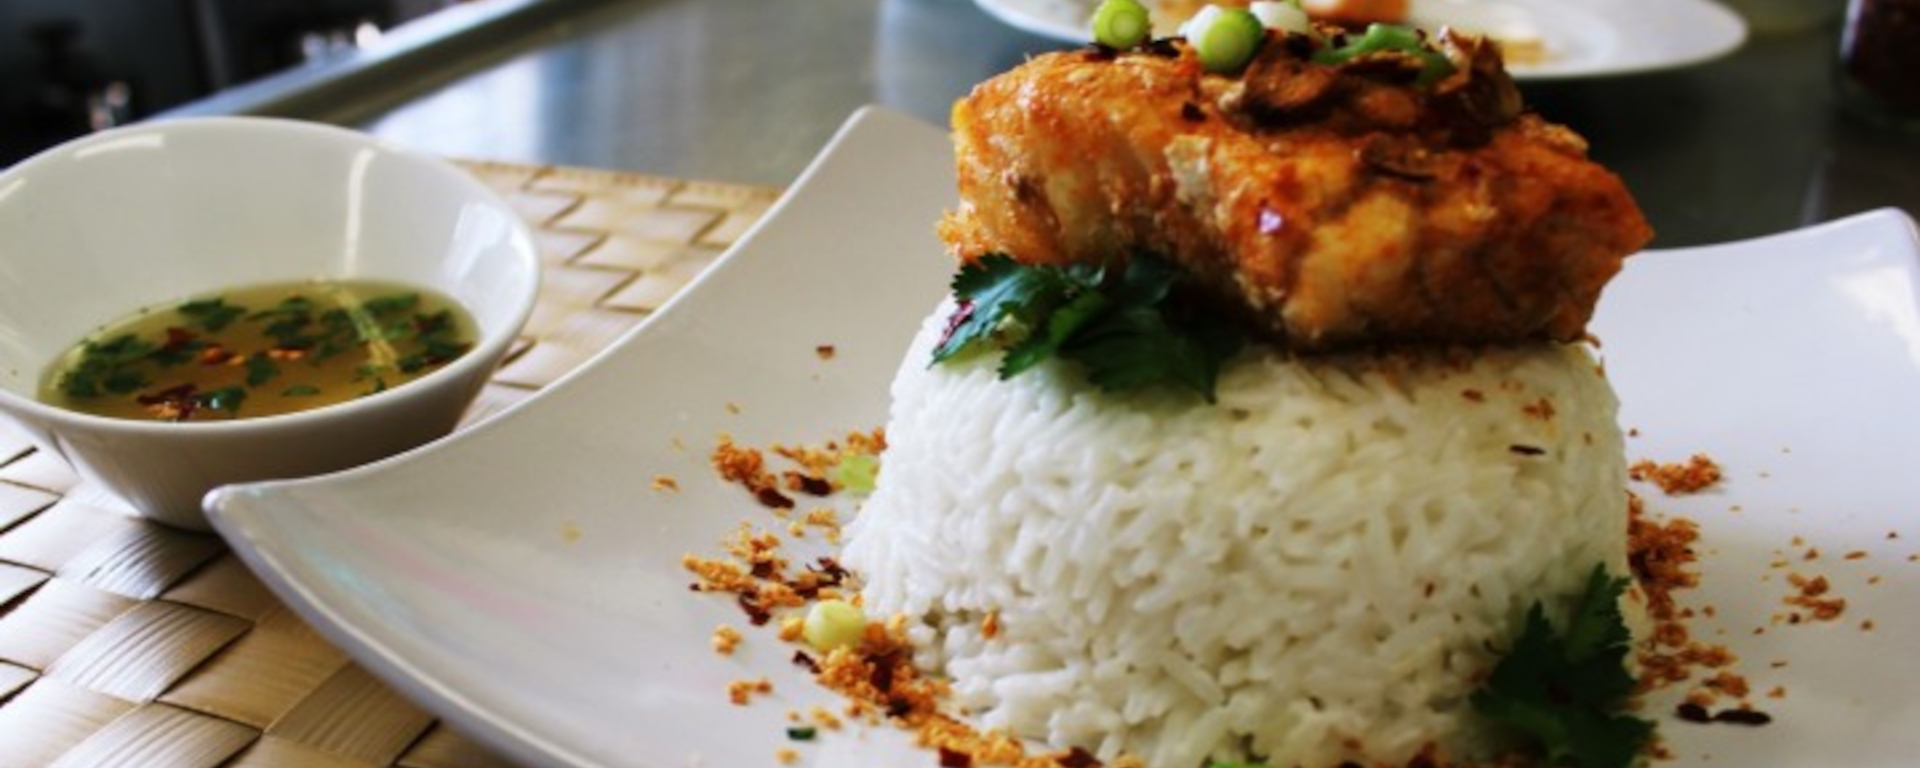 Baked Thai Fish with Coconut Rice